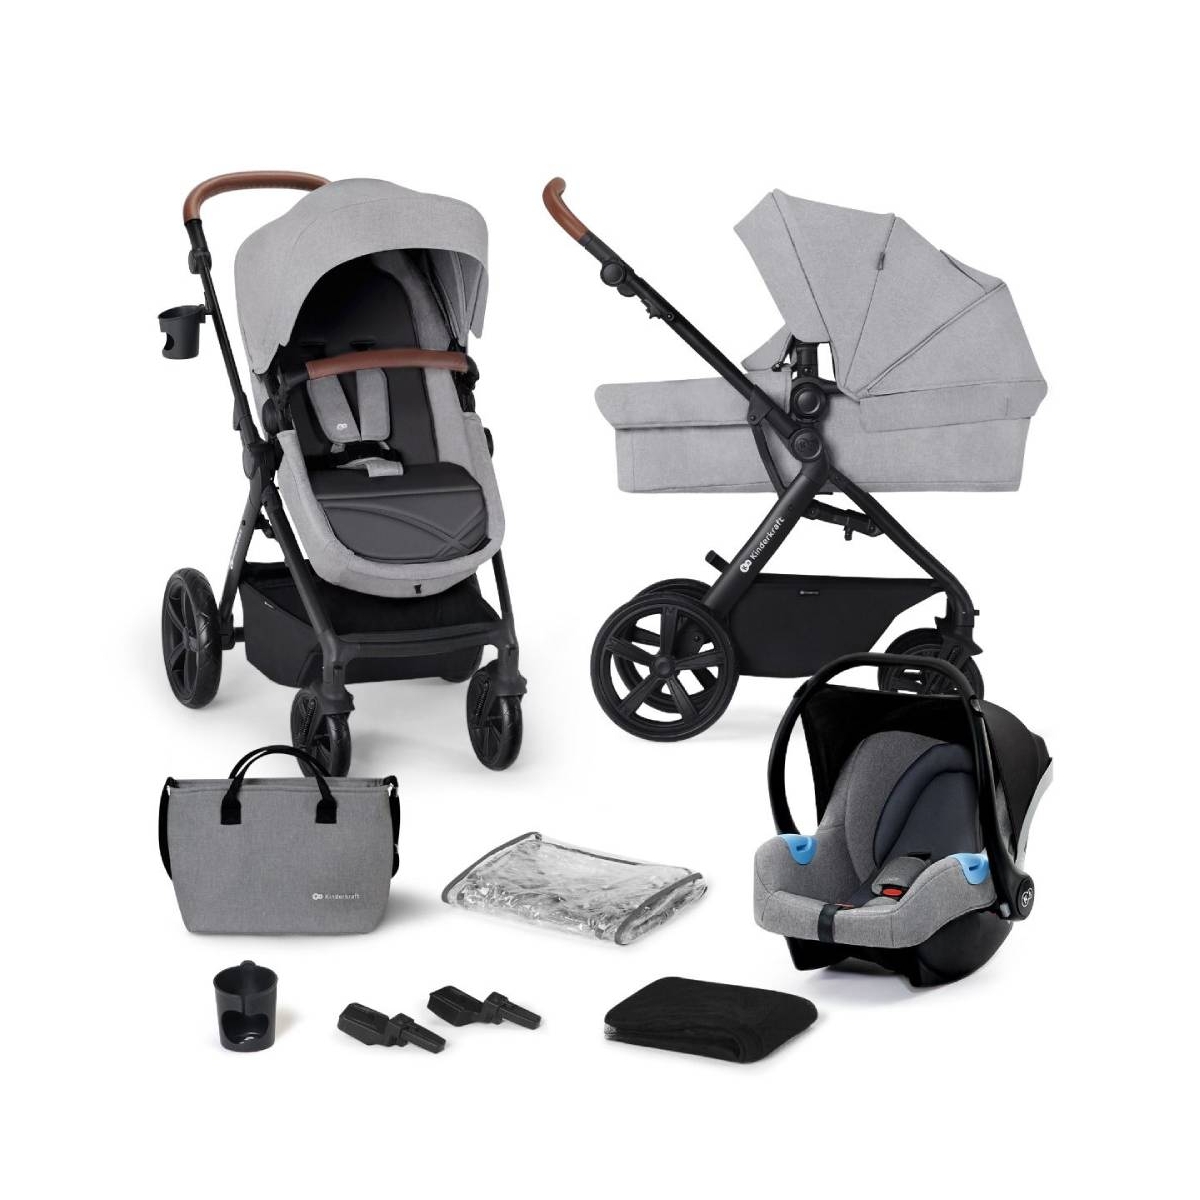 Kinderkraft A-Tour 3in1 with Mink Car Seat Travel System